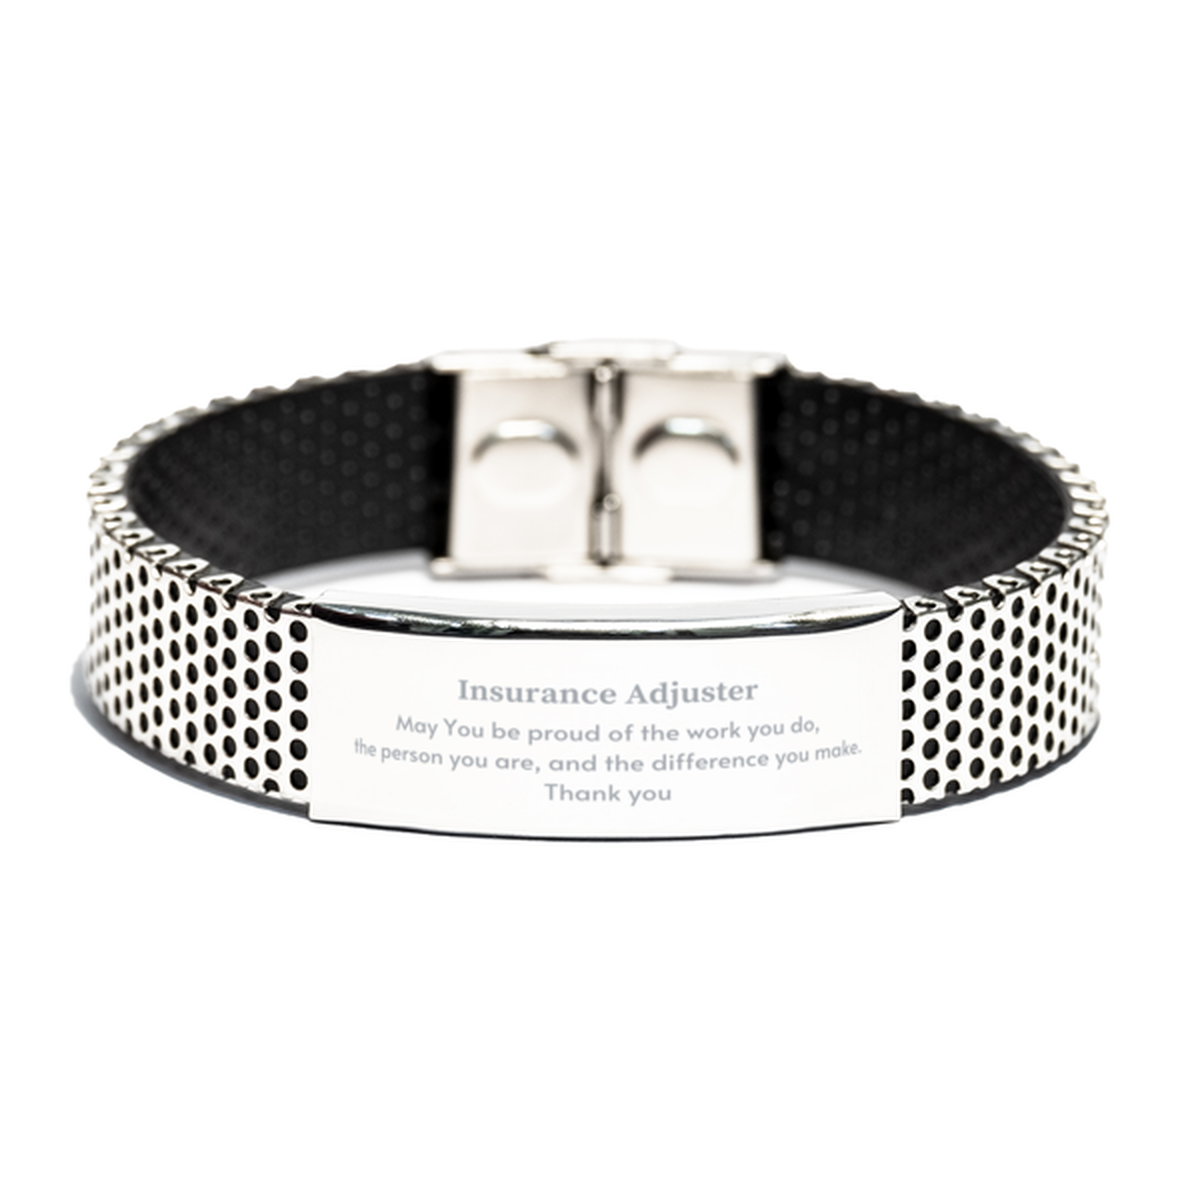 Heartwarming Stainless Steel Bracelet Retirement Coworkers Gifts for Insurance Adjuster, Insurance Adjuster May You be proud of the work you do, the person you are Gifts for Boss Men Women Friends